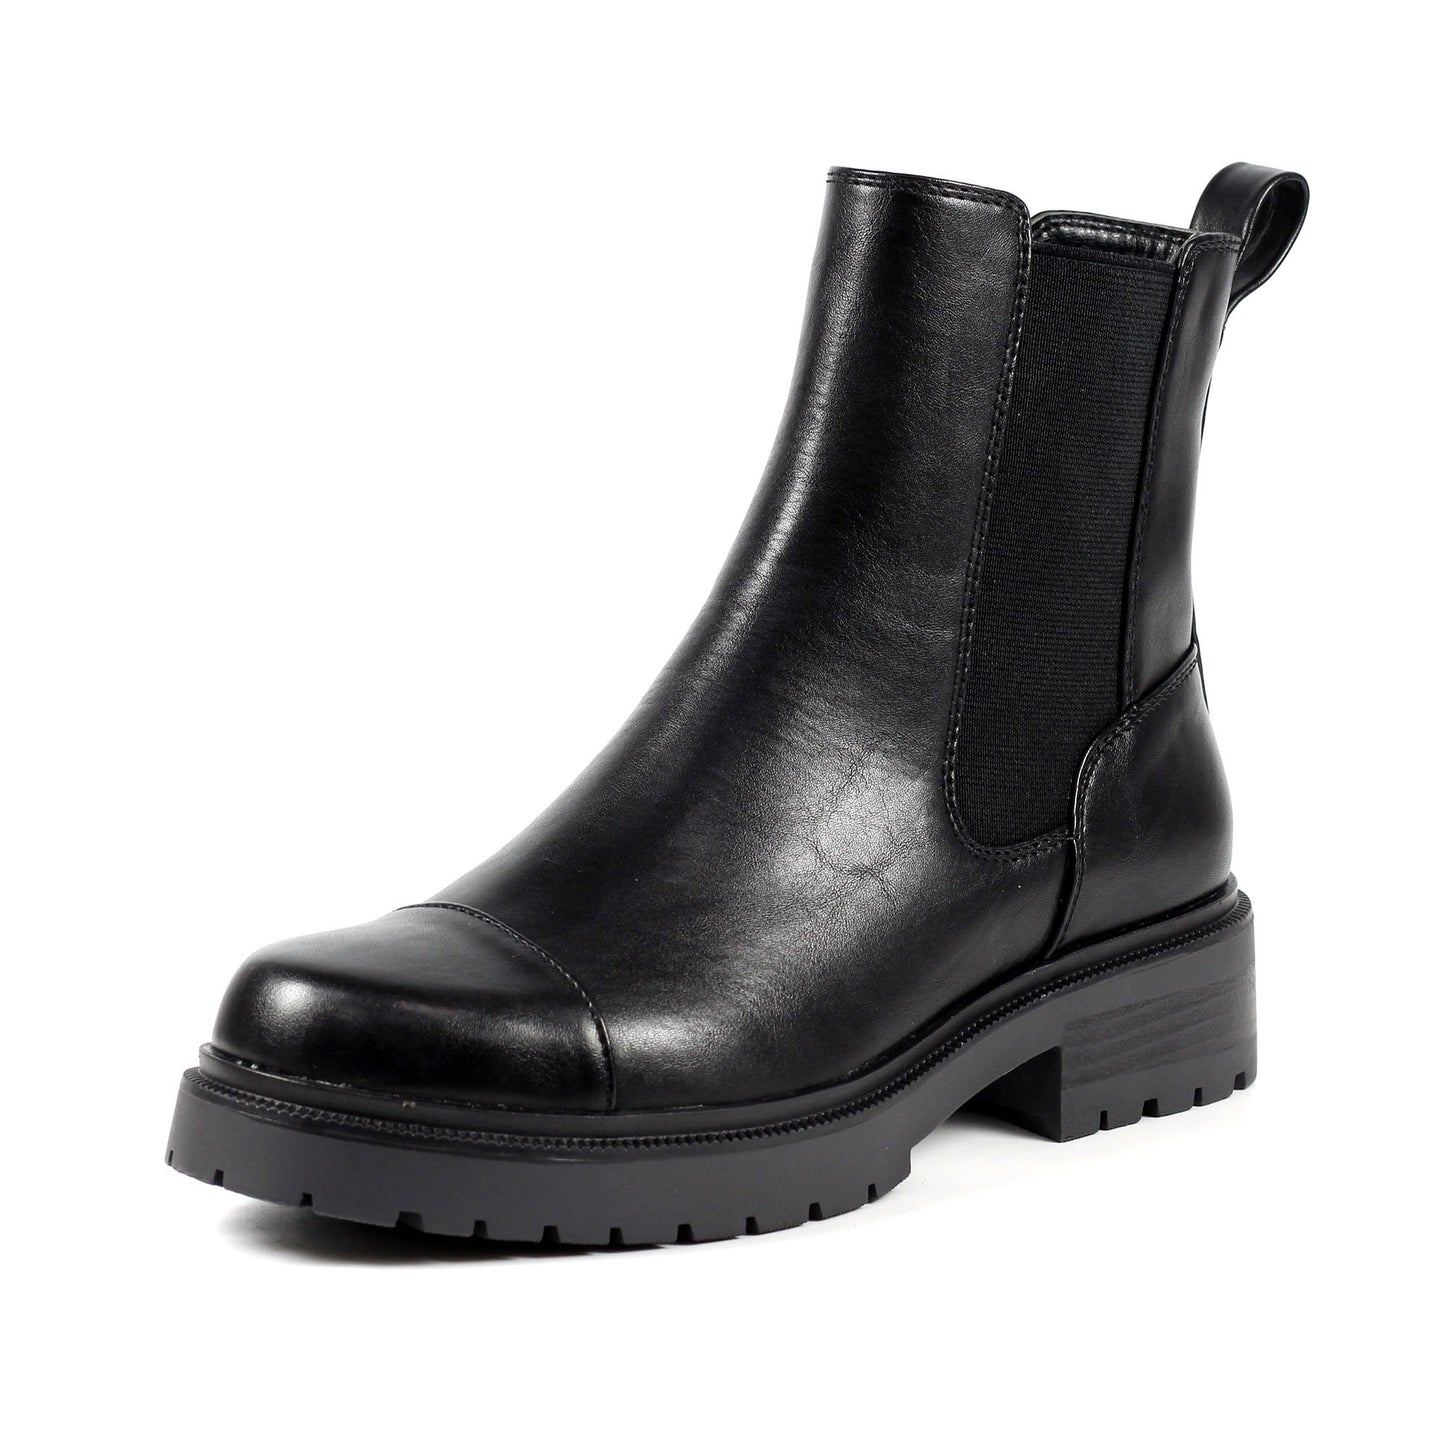 Lunar Culver black ankle boot with zip sizes 4-8